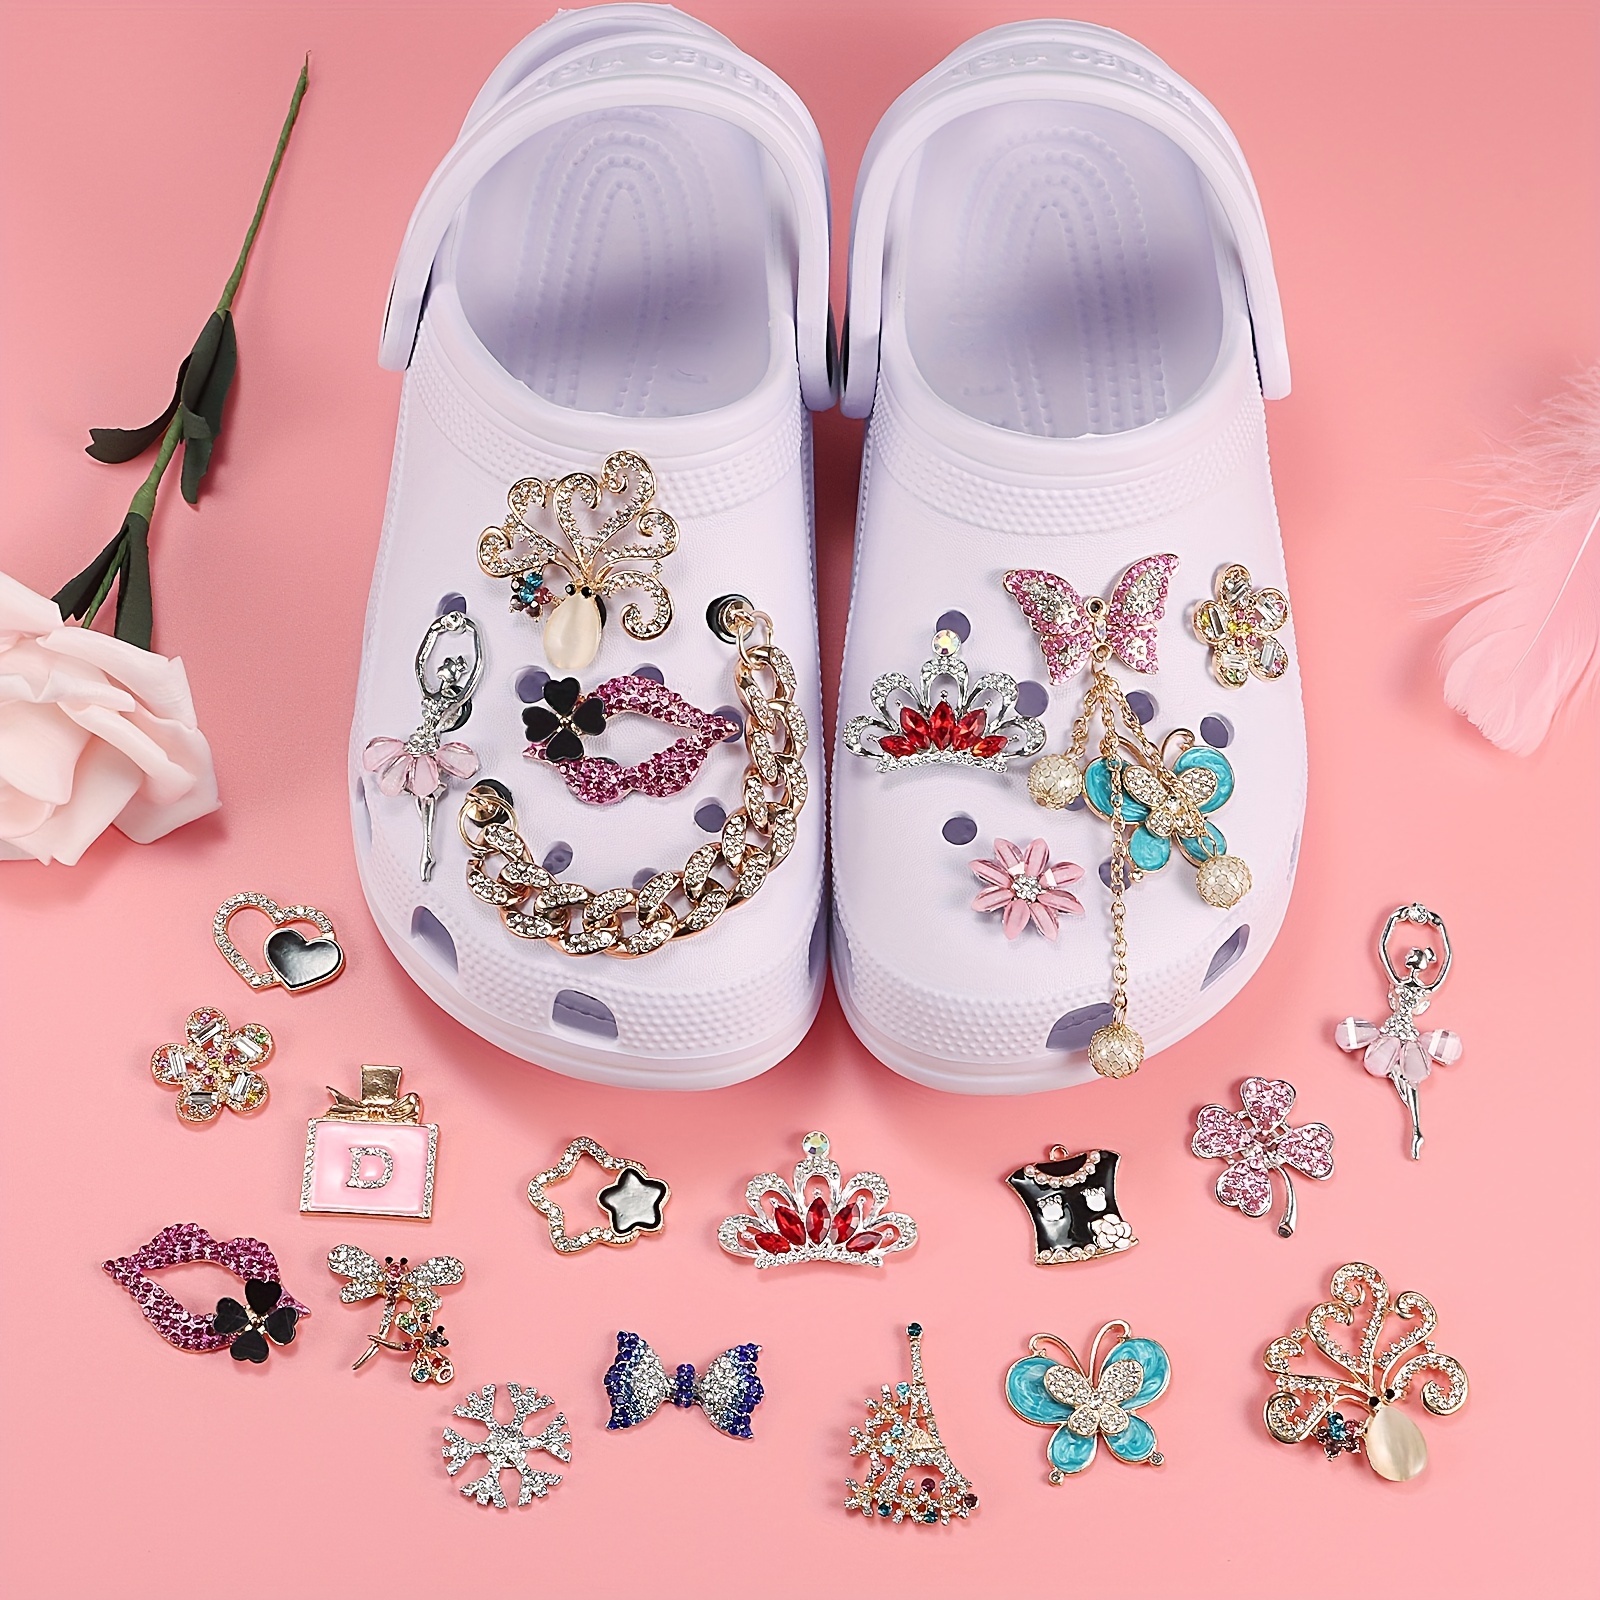 Bling Shoe Charms Charm Buttons Birthday Gifts Designer Charms